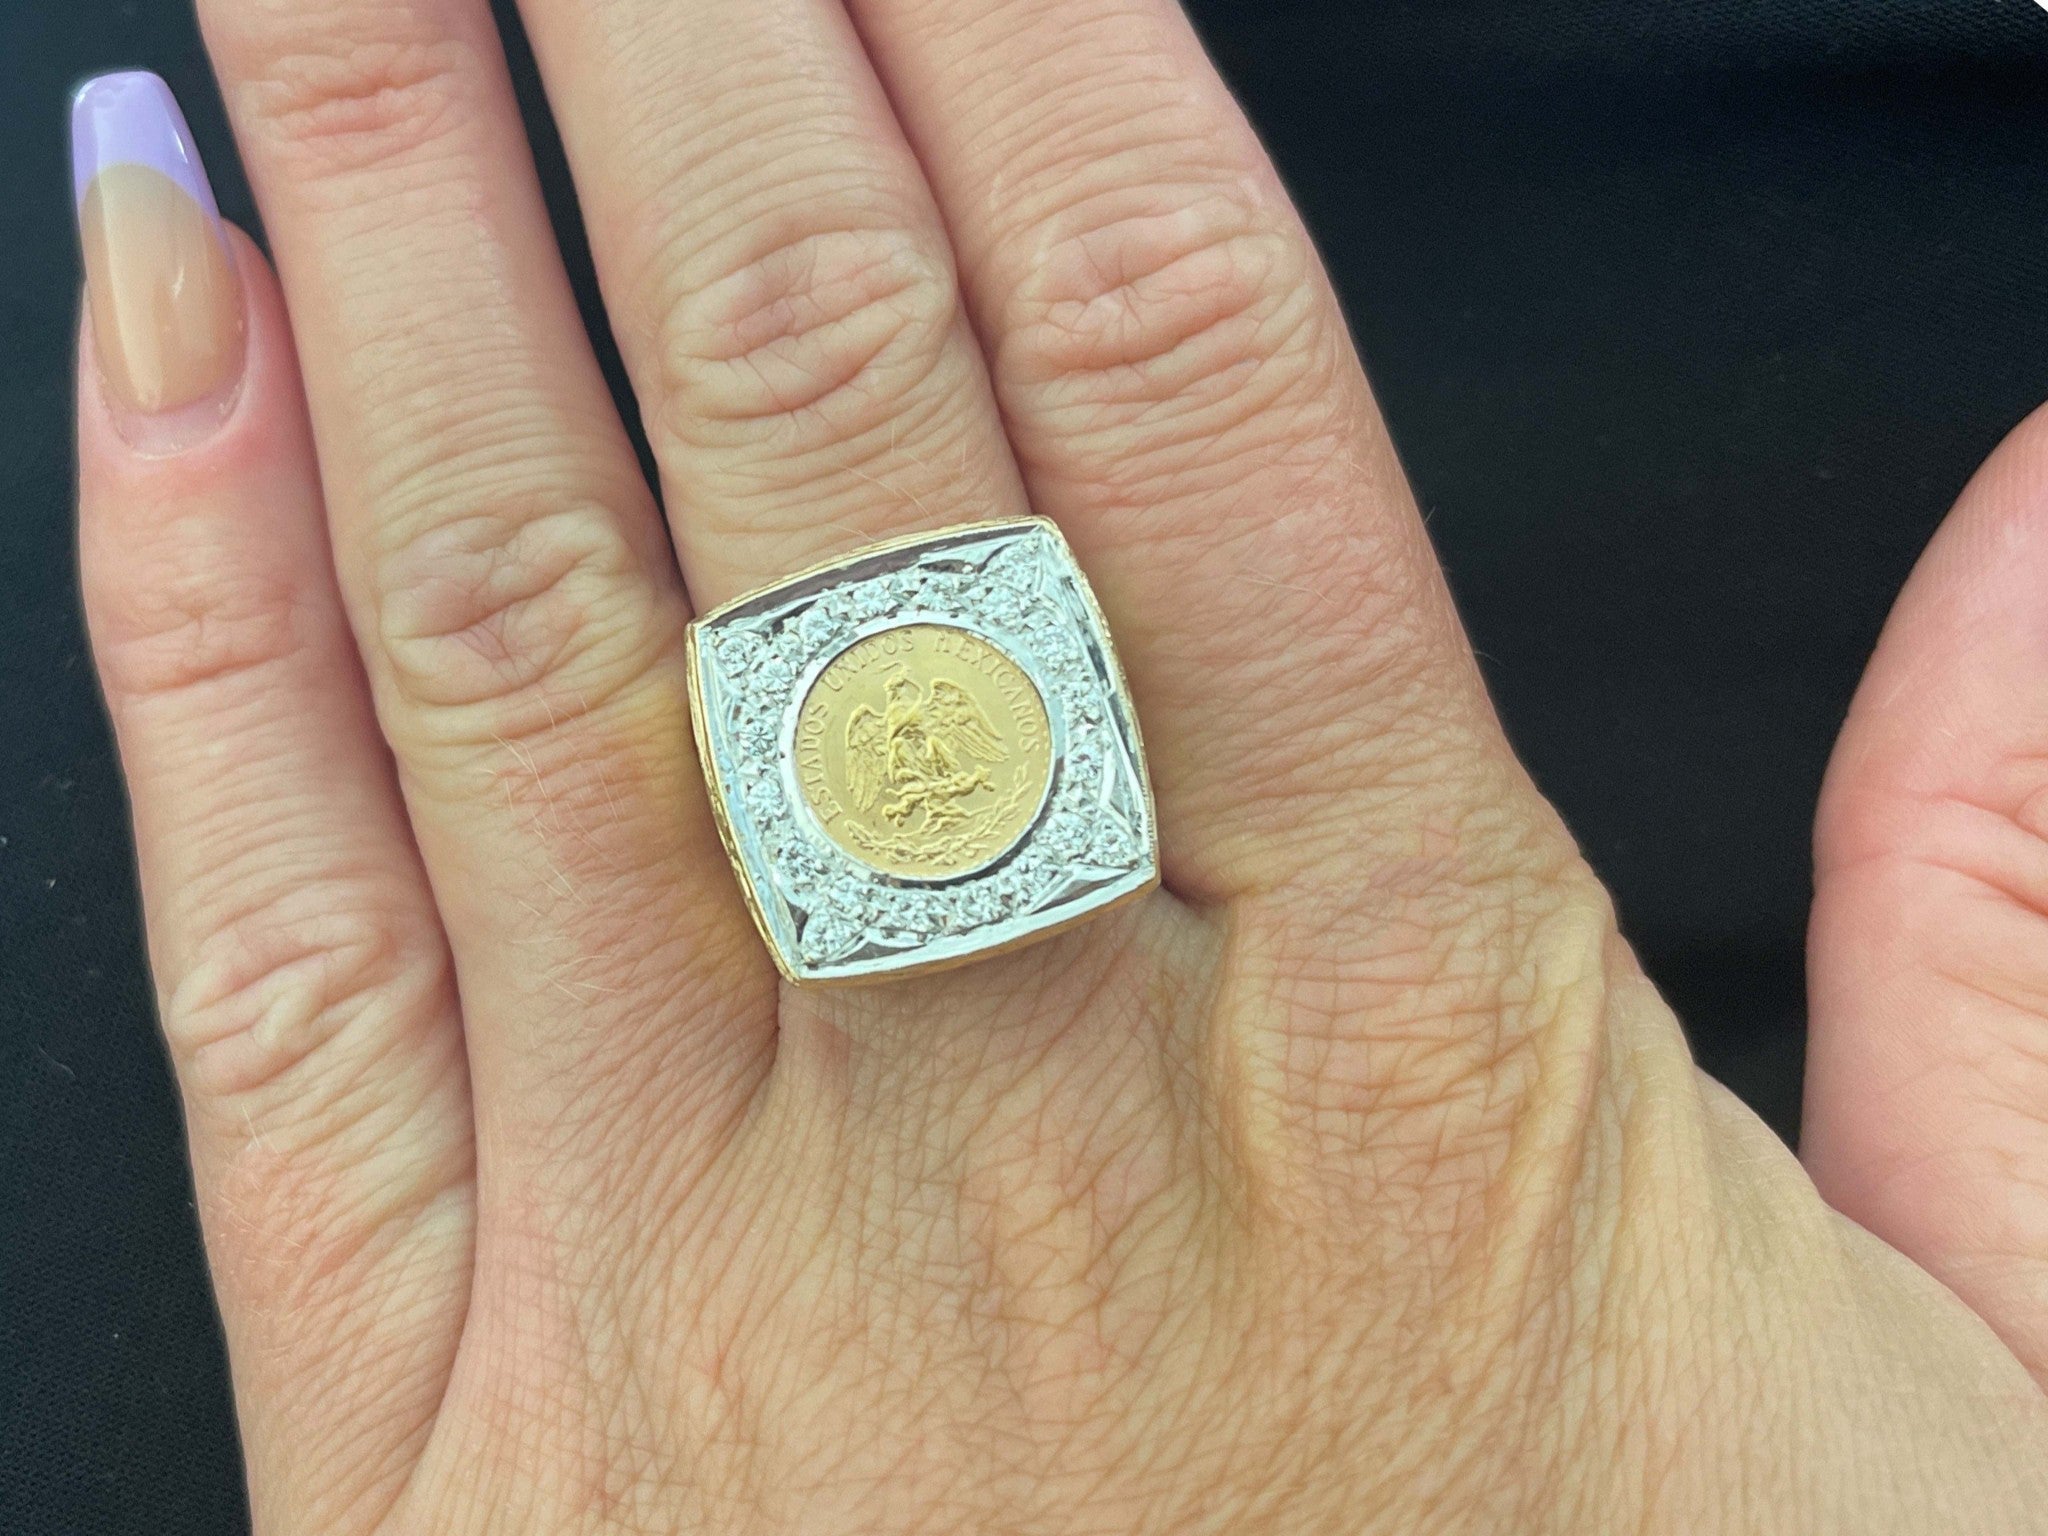 Men's gold Indian coin ring - YouTube